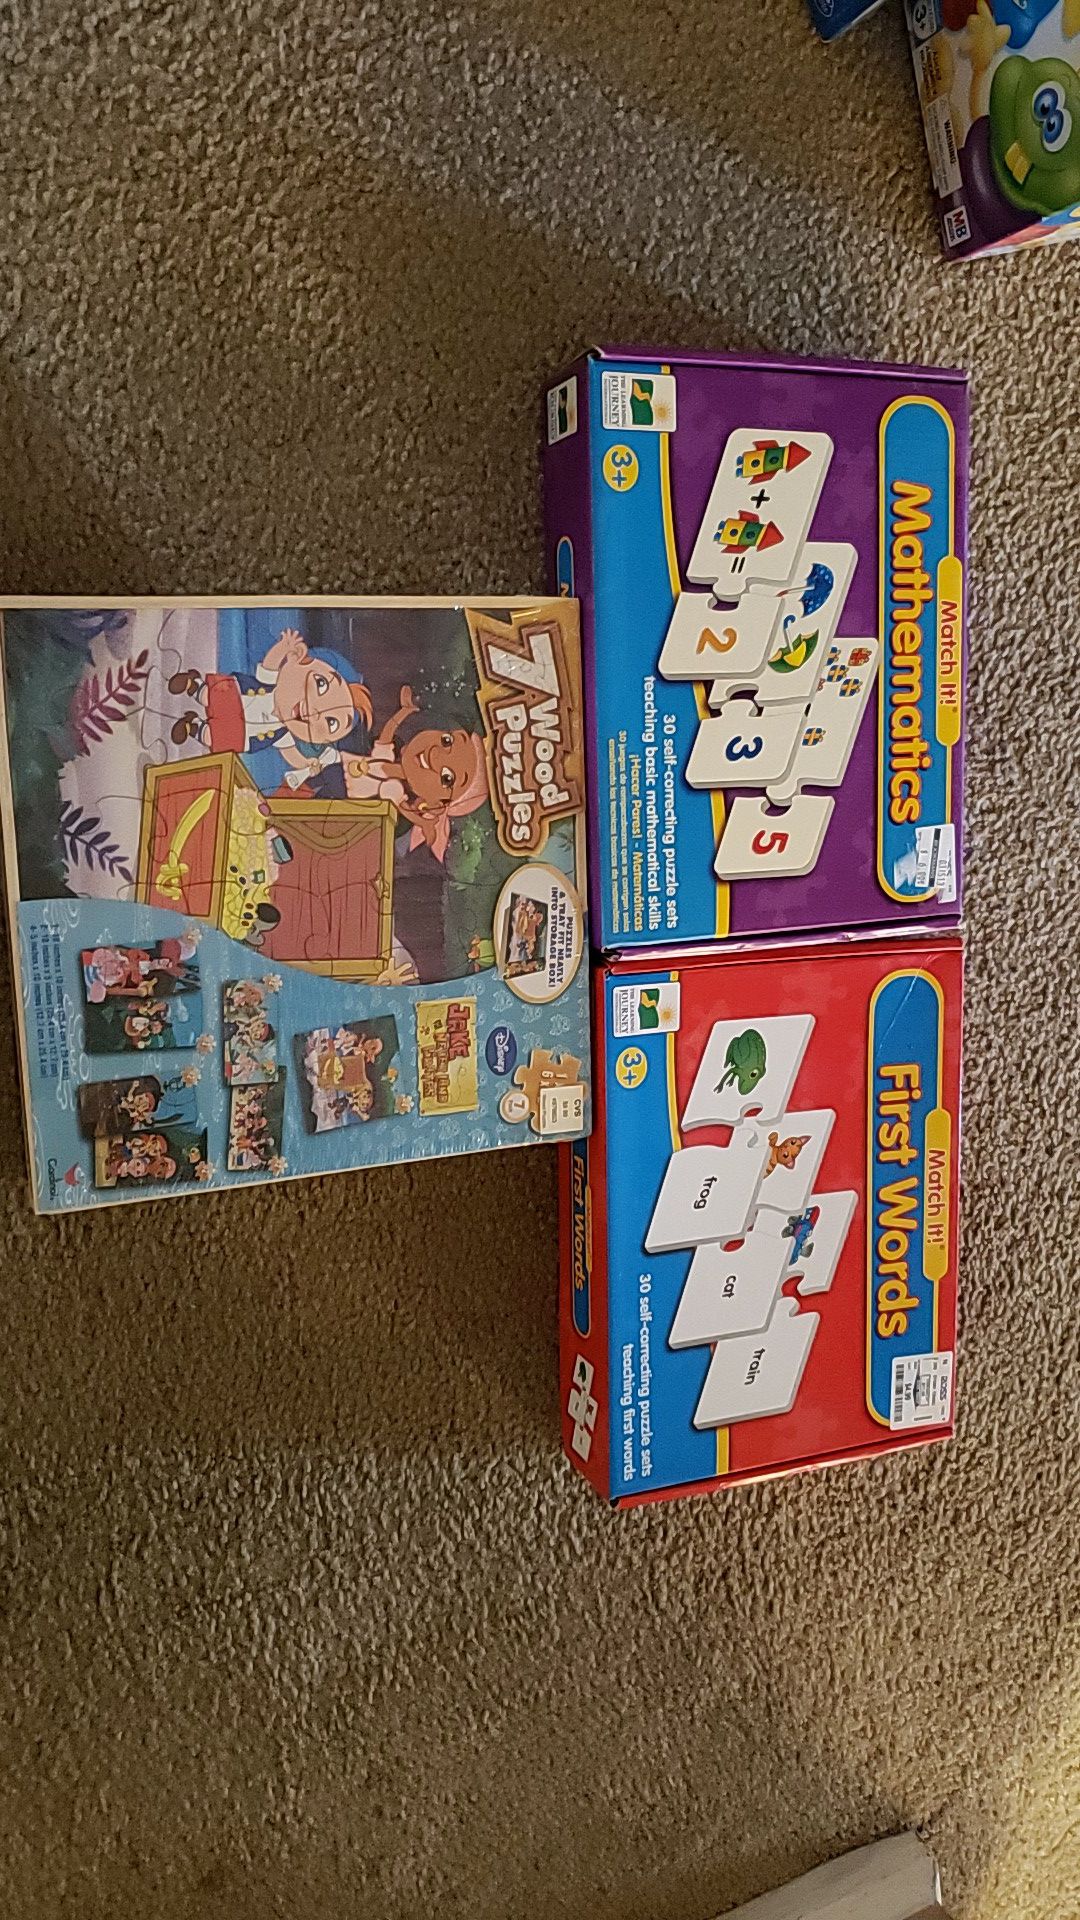 Large lot of kids games and puzzles